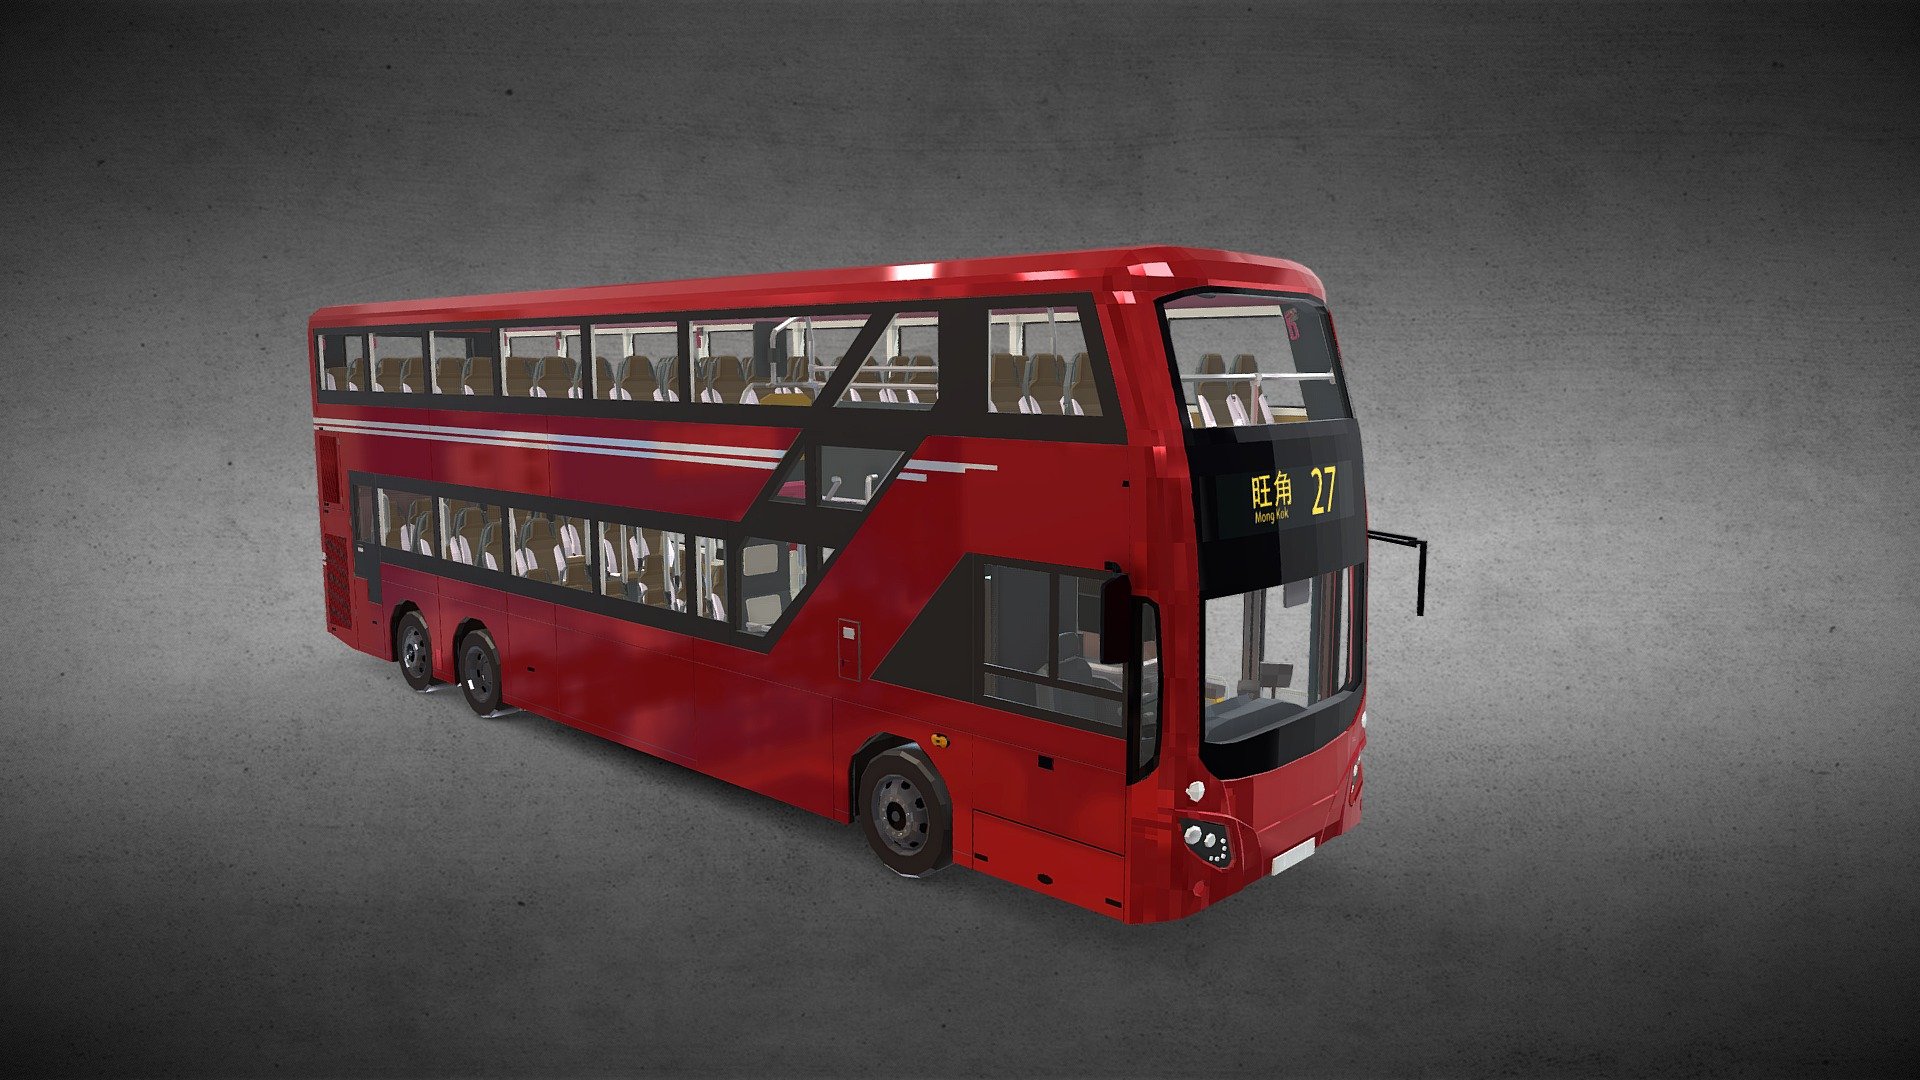 Hong Kong B8L Bus  Version 2

The Volvo B8L is a 3-axle bus chassis, for double-decker buses, manufactured by Volvo Buses since 2018, with pre-production batches being produced as early as in 2016.
This model is the Volvo B8L bus, 12.8 meters long,  MCV EvoSeti body, Upper 59 seats, lower 31 seats. 

Visit information below.

Wiki(https://en.wikipedia.org/wiki/Volvo_B8L)
http://hkbric.hkbdc.info/bic/intro/kmb-b8l.htm

My Models

DrinkPack

Snack

Recycle Bin

RedMiniBus

Building Pack

Visit businessyuen.com, like, follow and download my game in google play 3d model